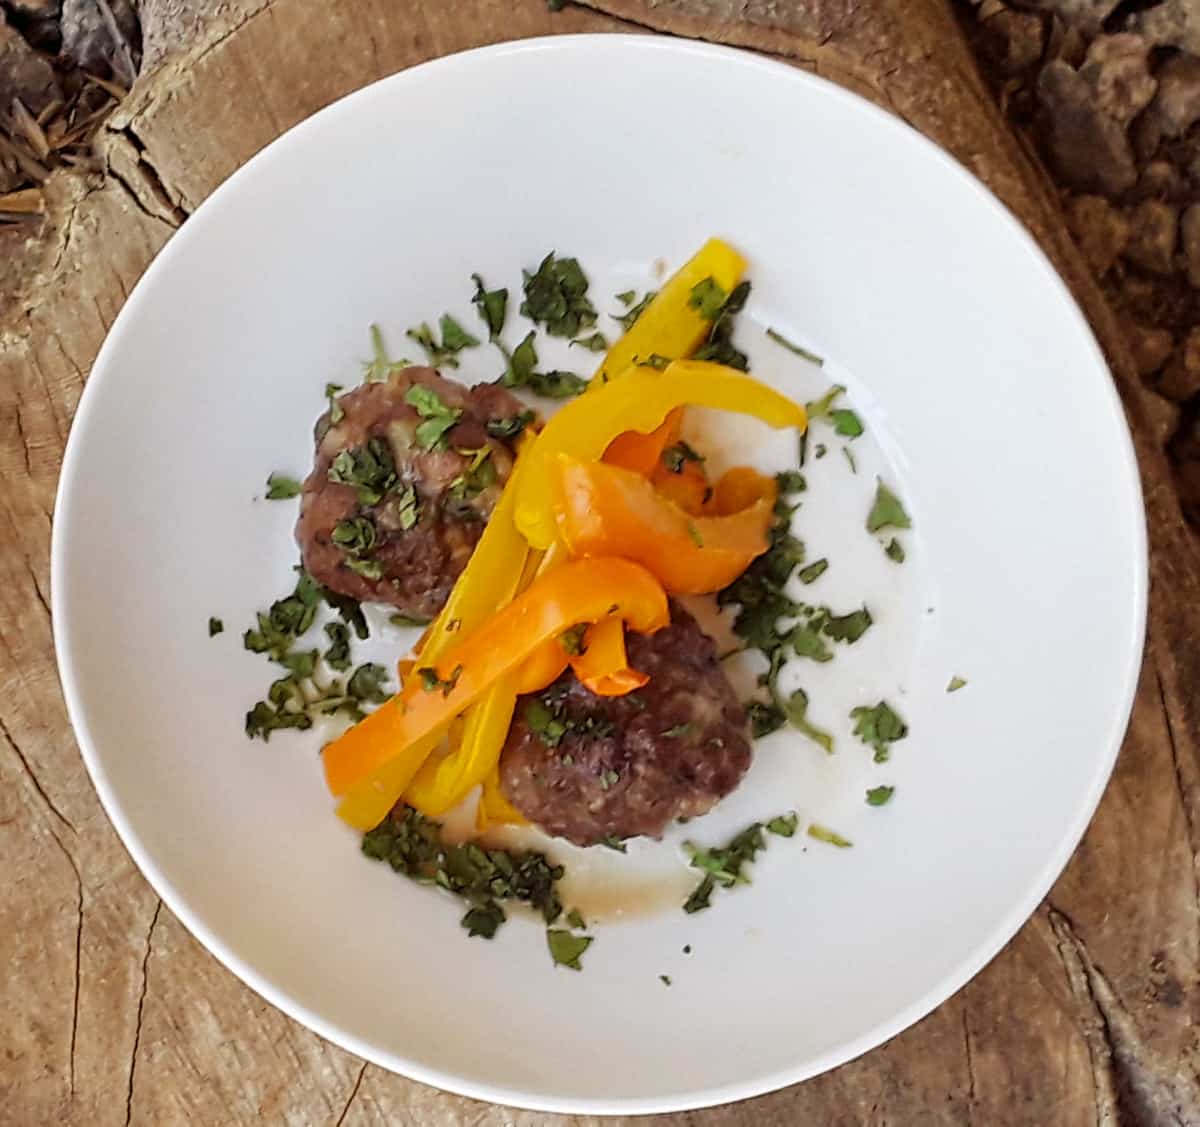 Baked meatballs with peppers on white dinner plate garnished with fresh chopped herbs.